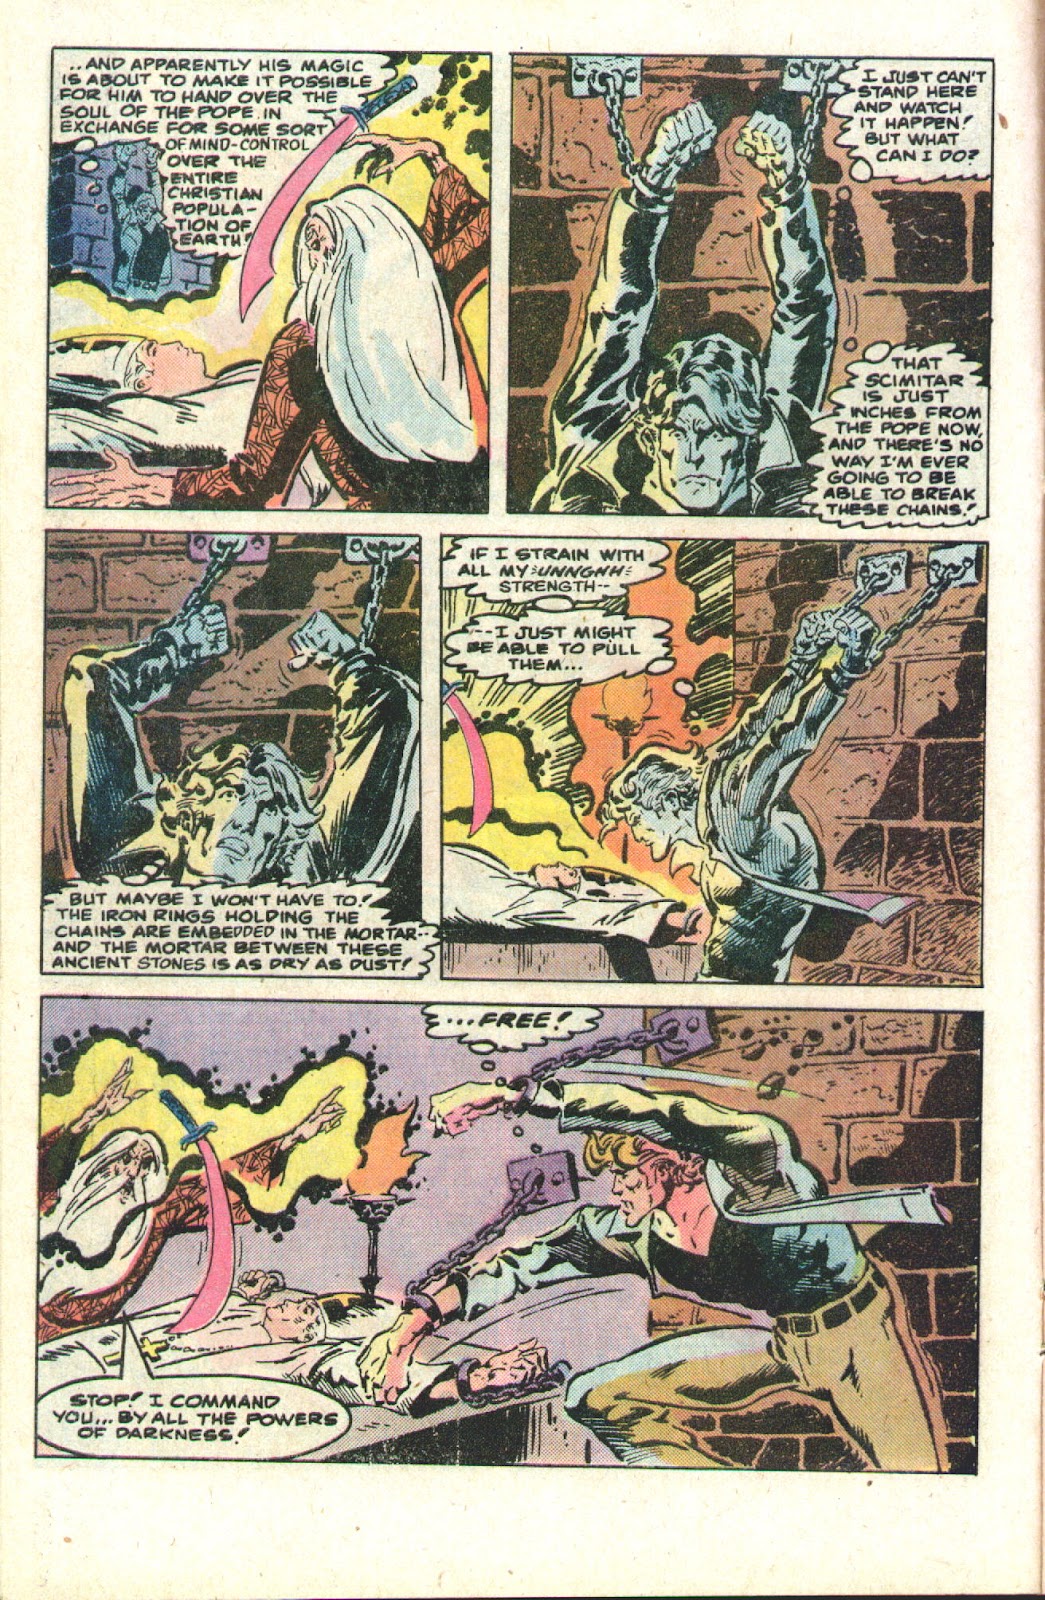 What If? (1977) issue 28 - Daredevil became an agent of SHIELD - Page 22